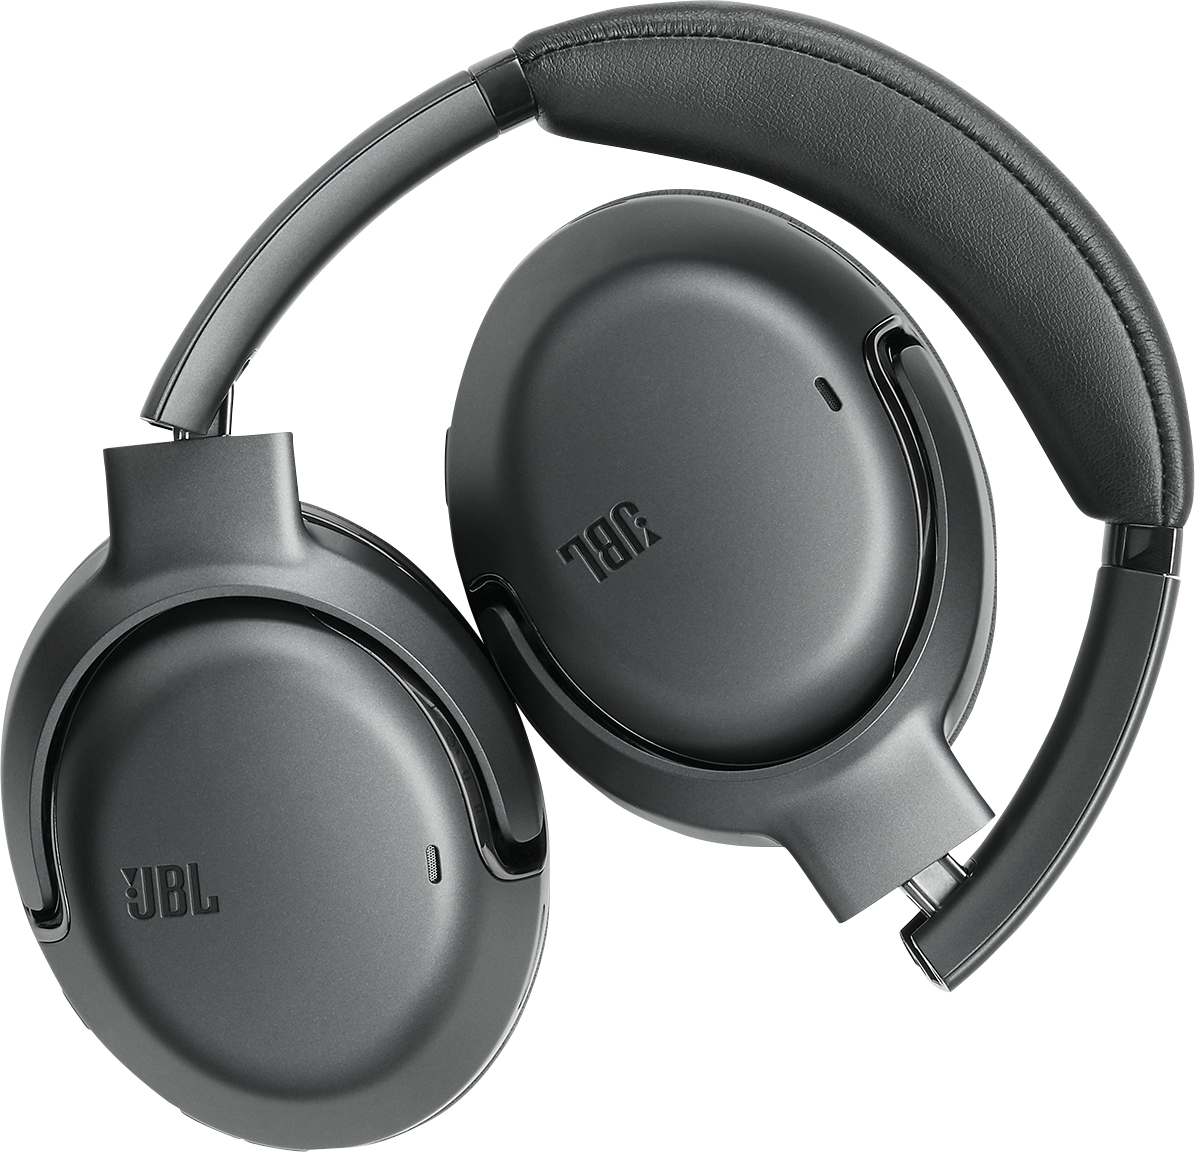 One Wireless Headphones Cancelling Tour Noise JBL